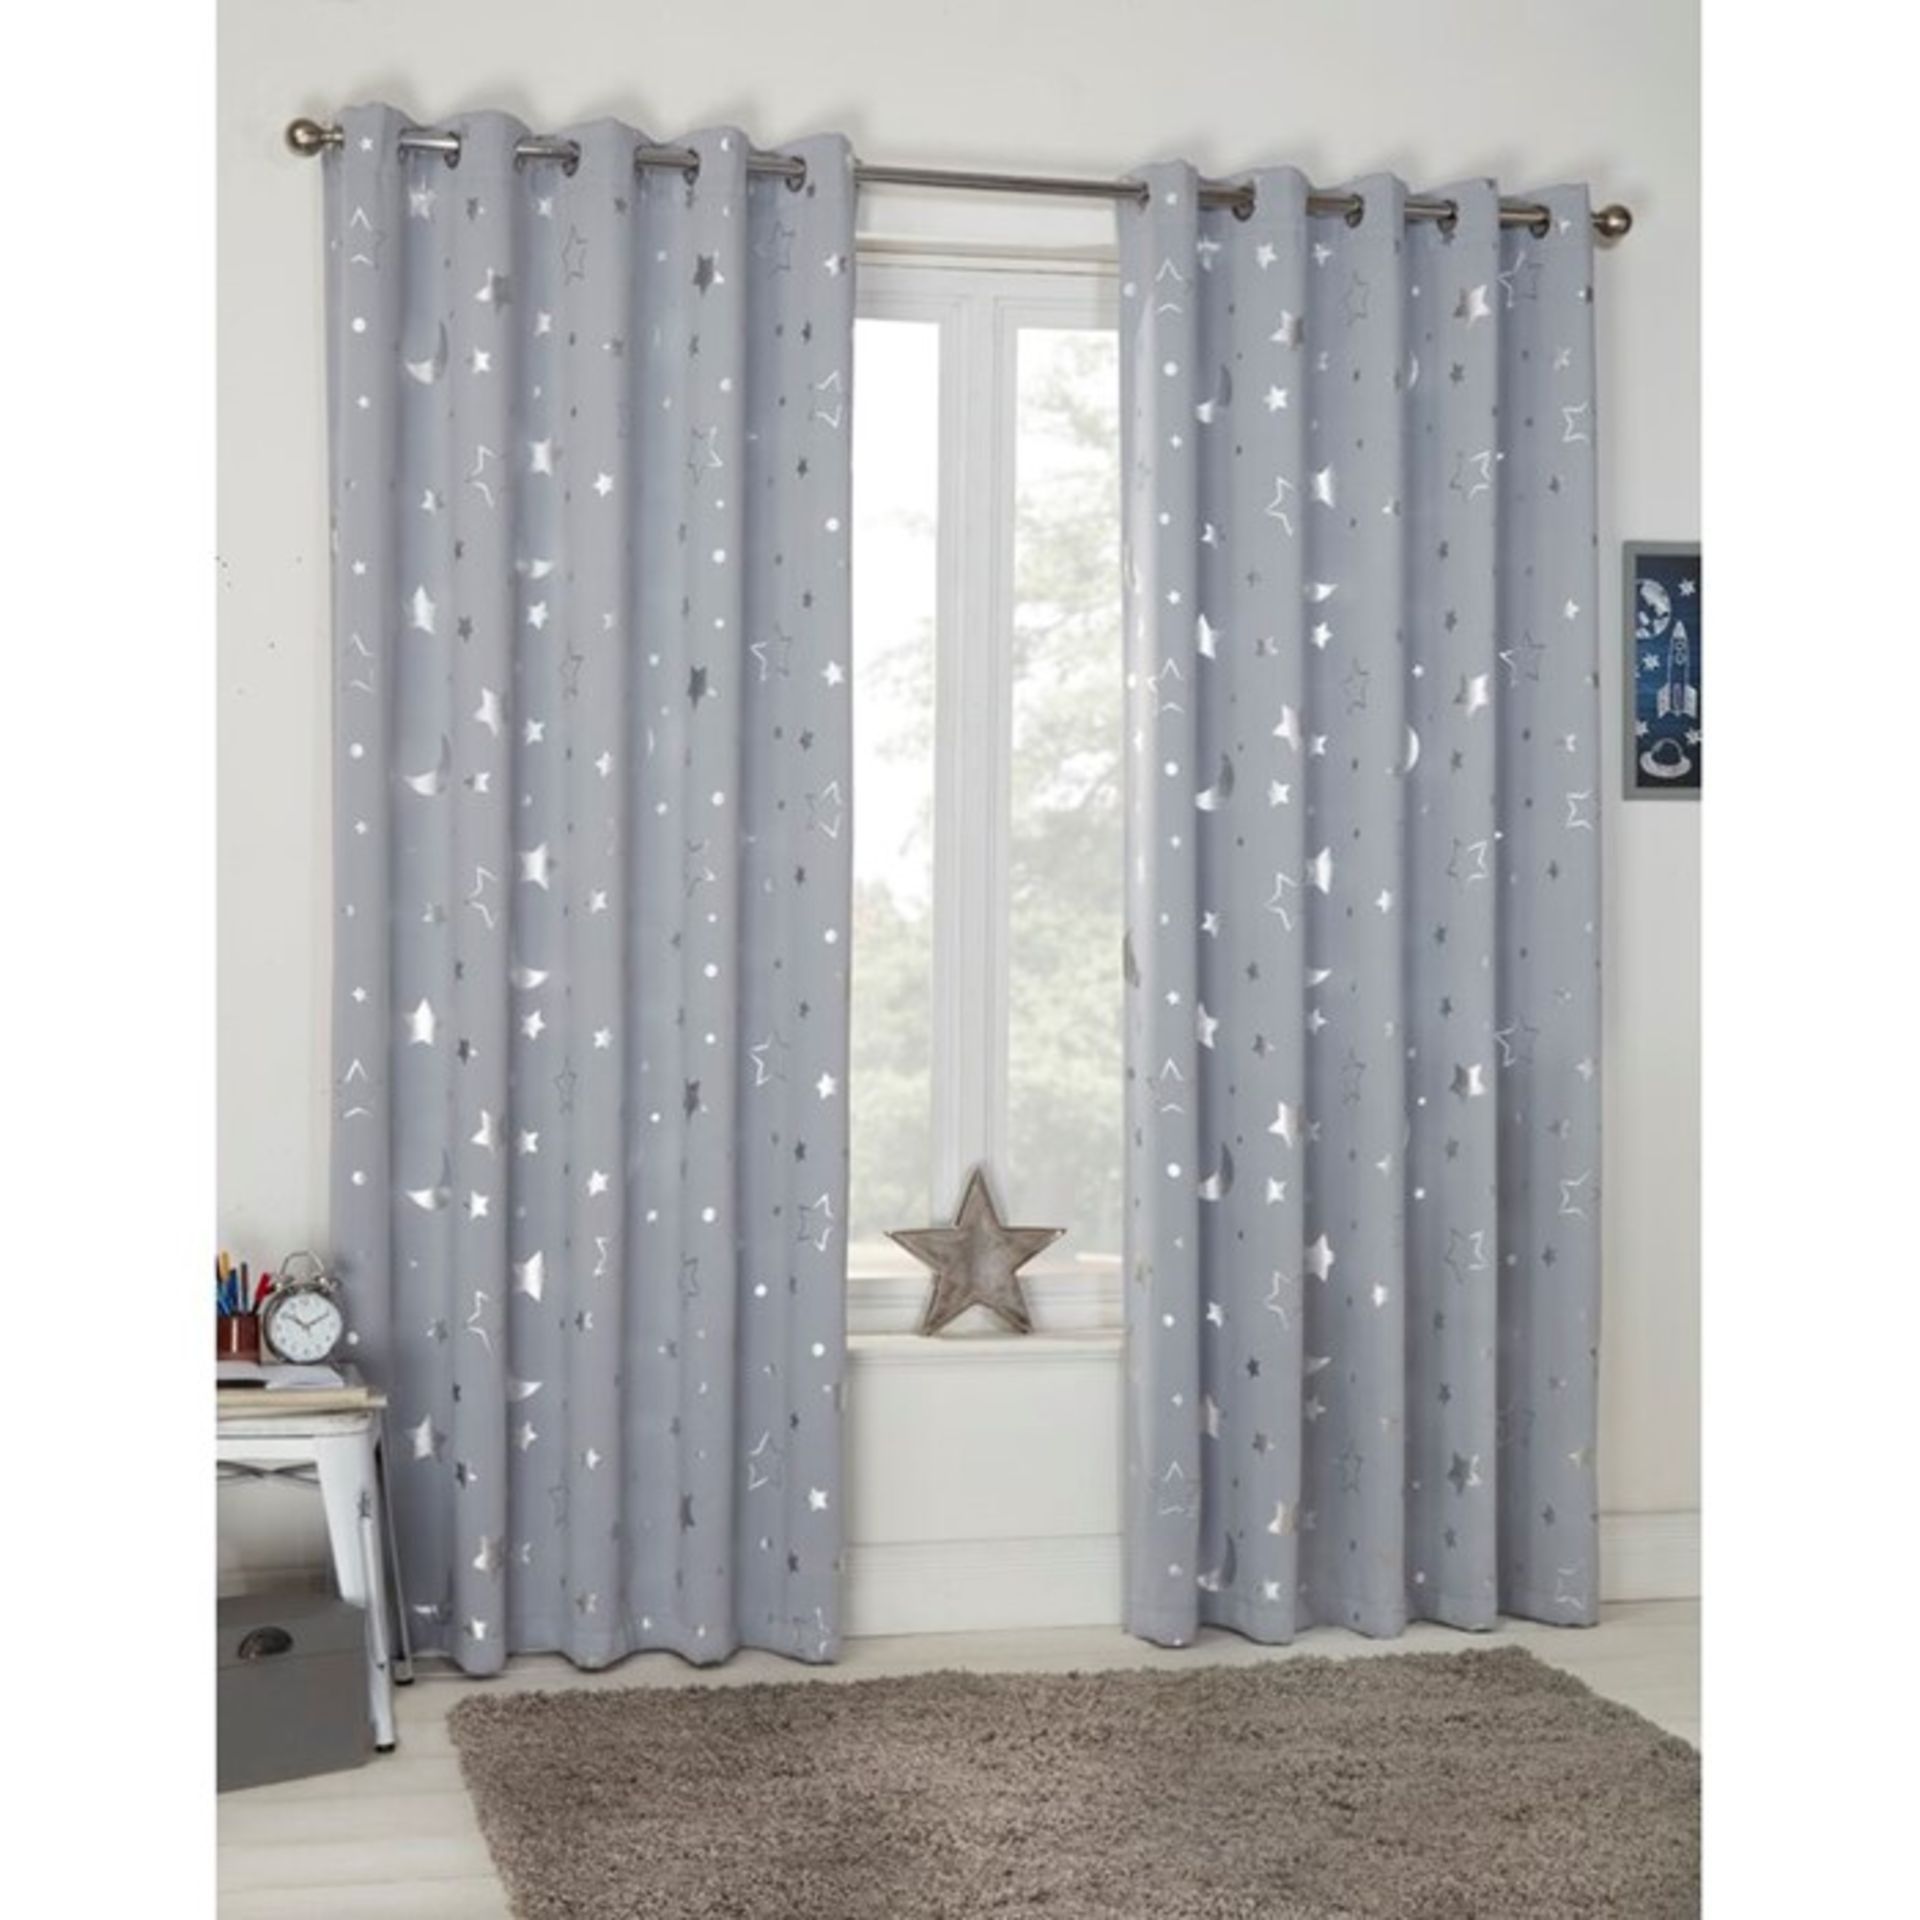 17 Stories, Saucier Galaxy Eyelet Blackout Thermal Curtains (PINK)(46X54") - RRP £23.99 (